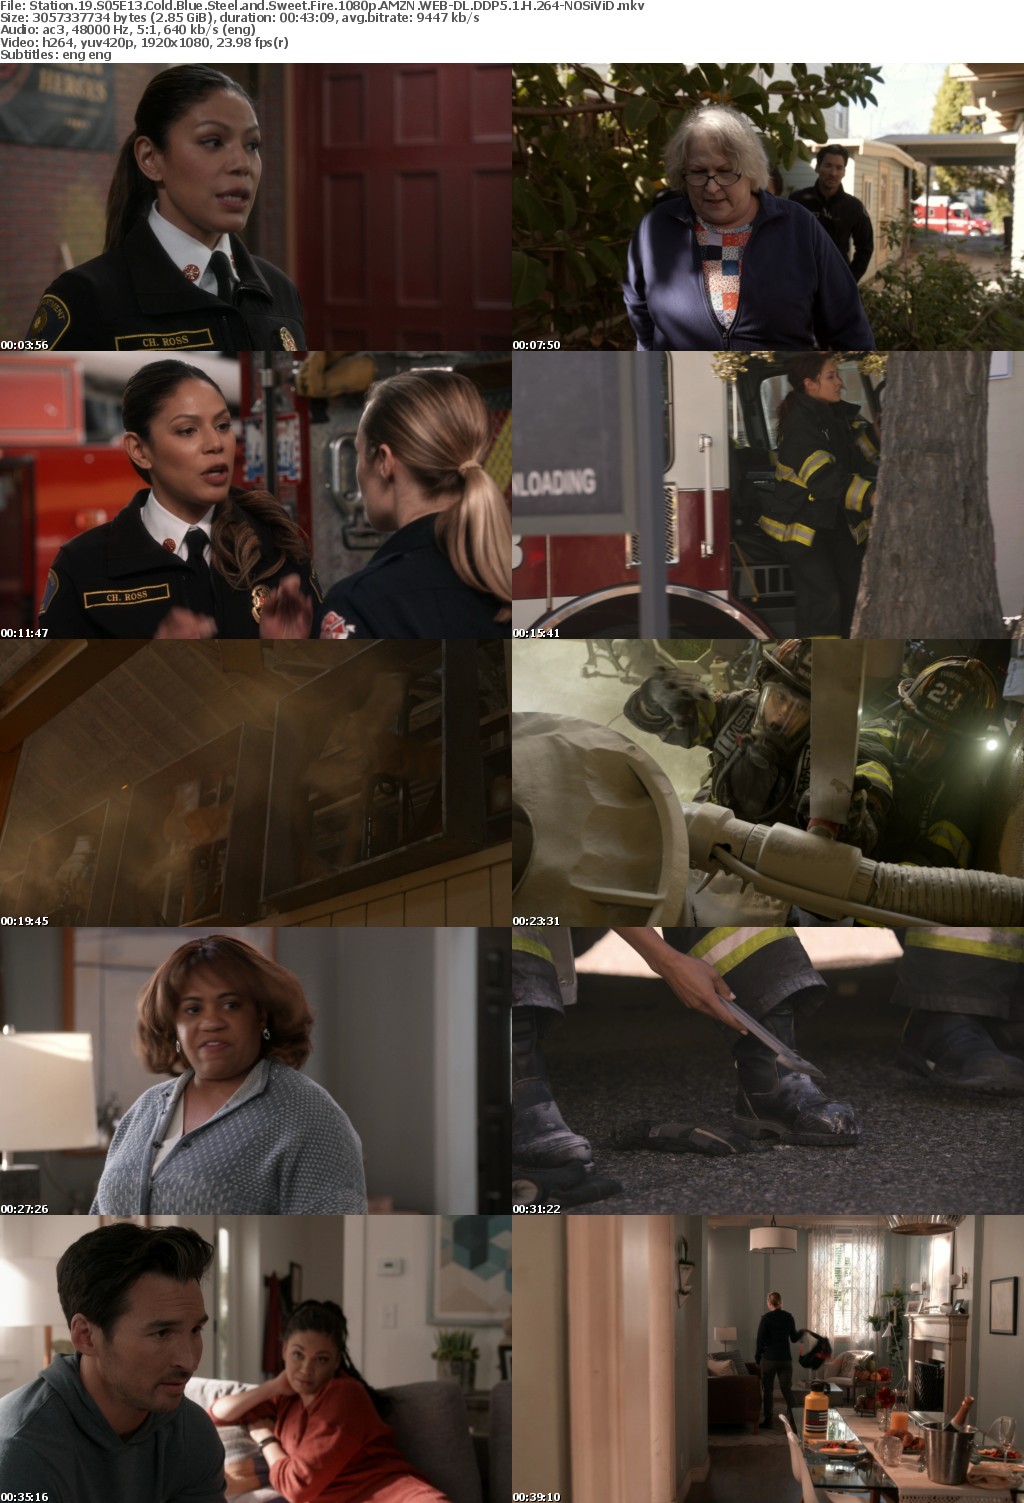 Station 19 S05E13 Cold Blue Steel and Sweet Fire 1080p AMZN WEBRip DDP5 1 x264-NOSiViD